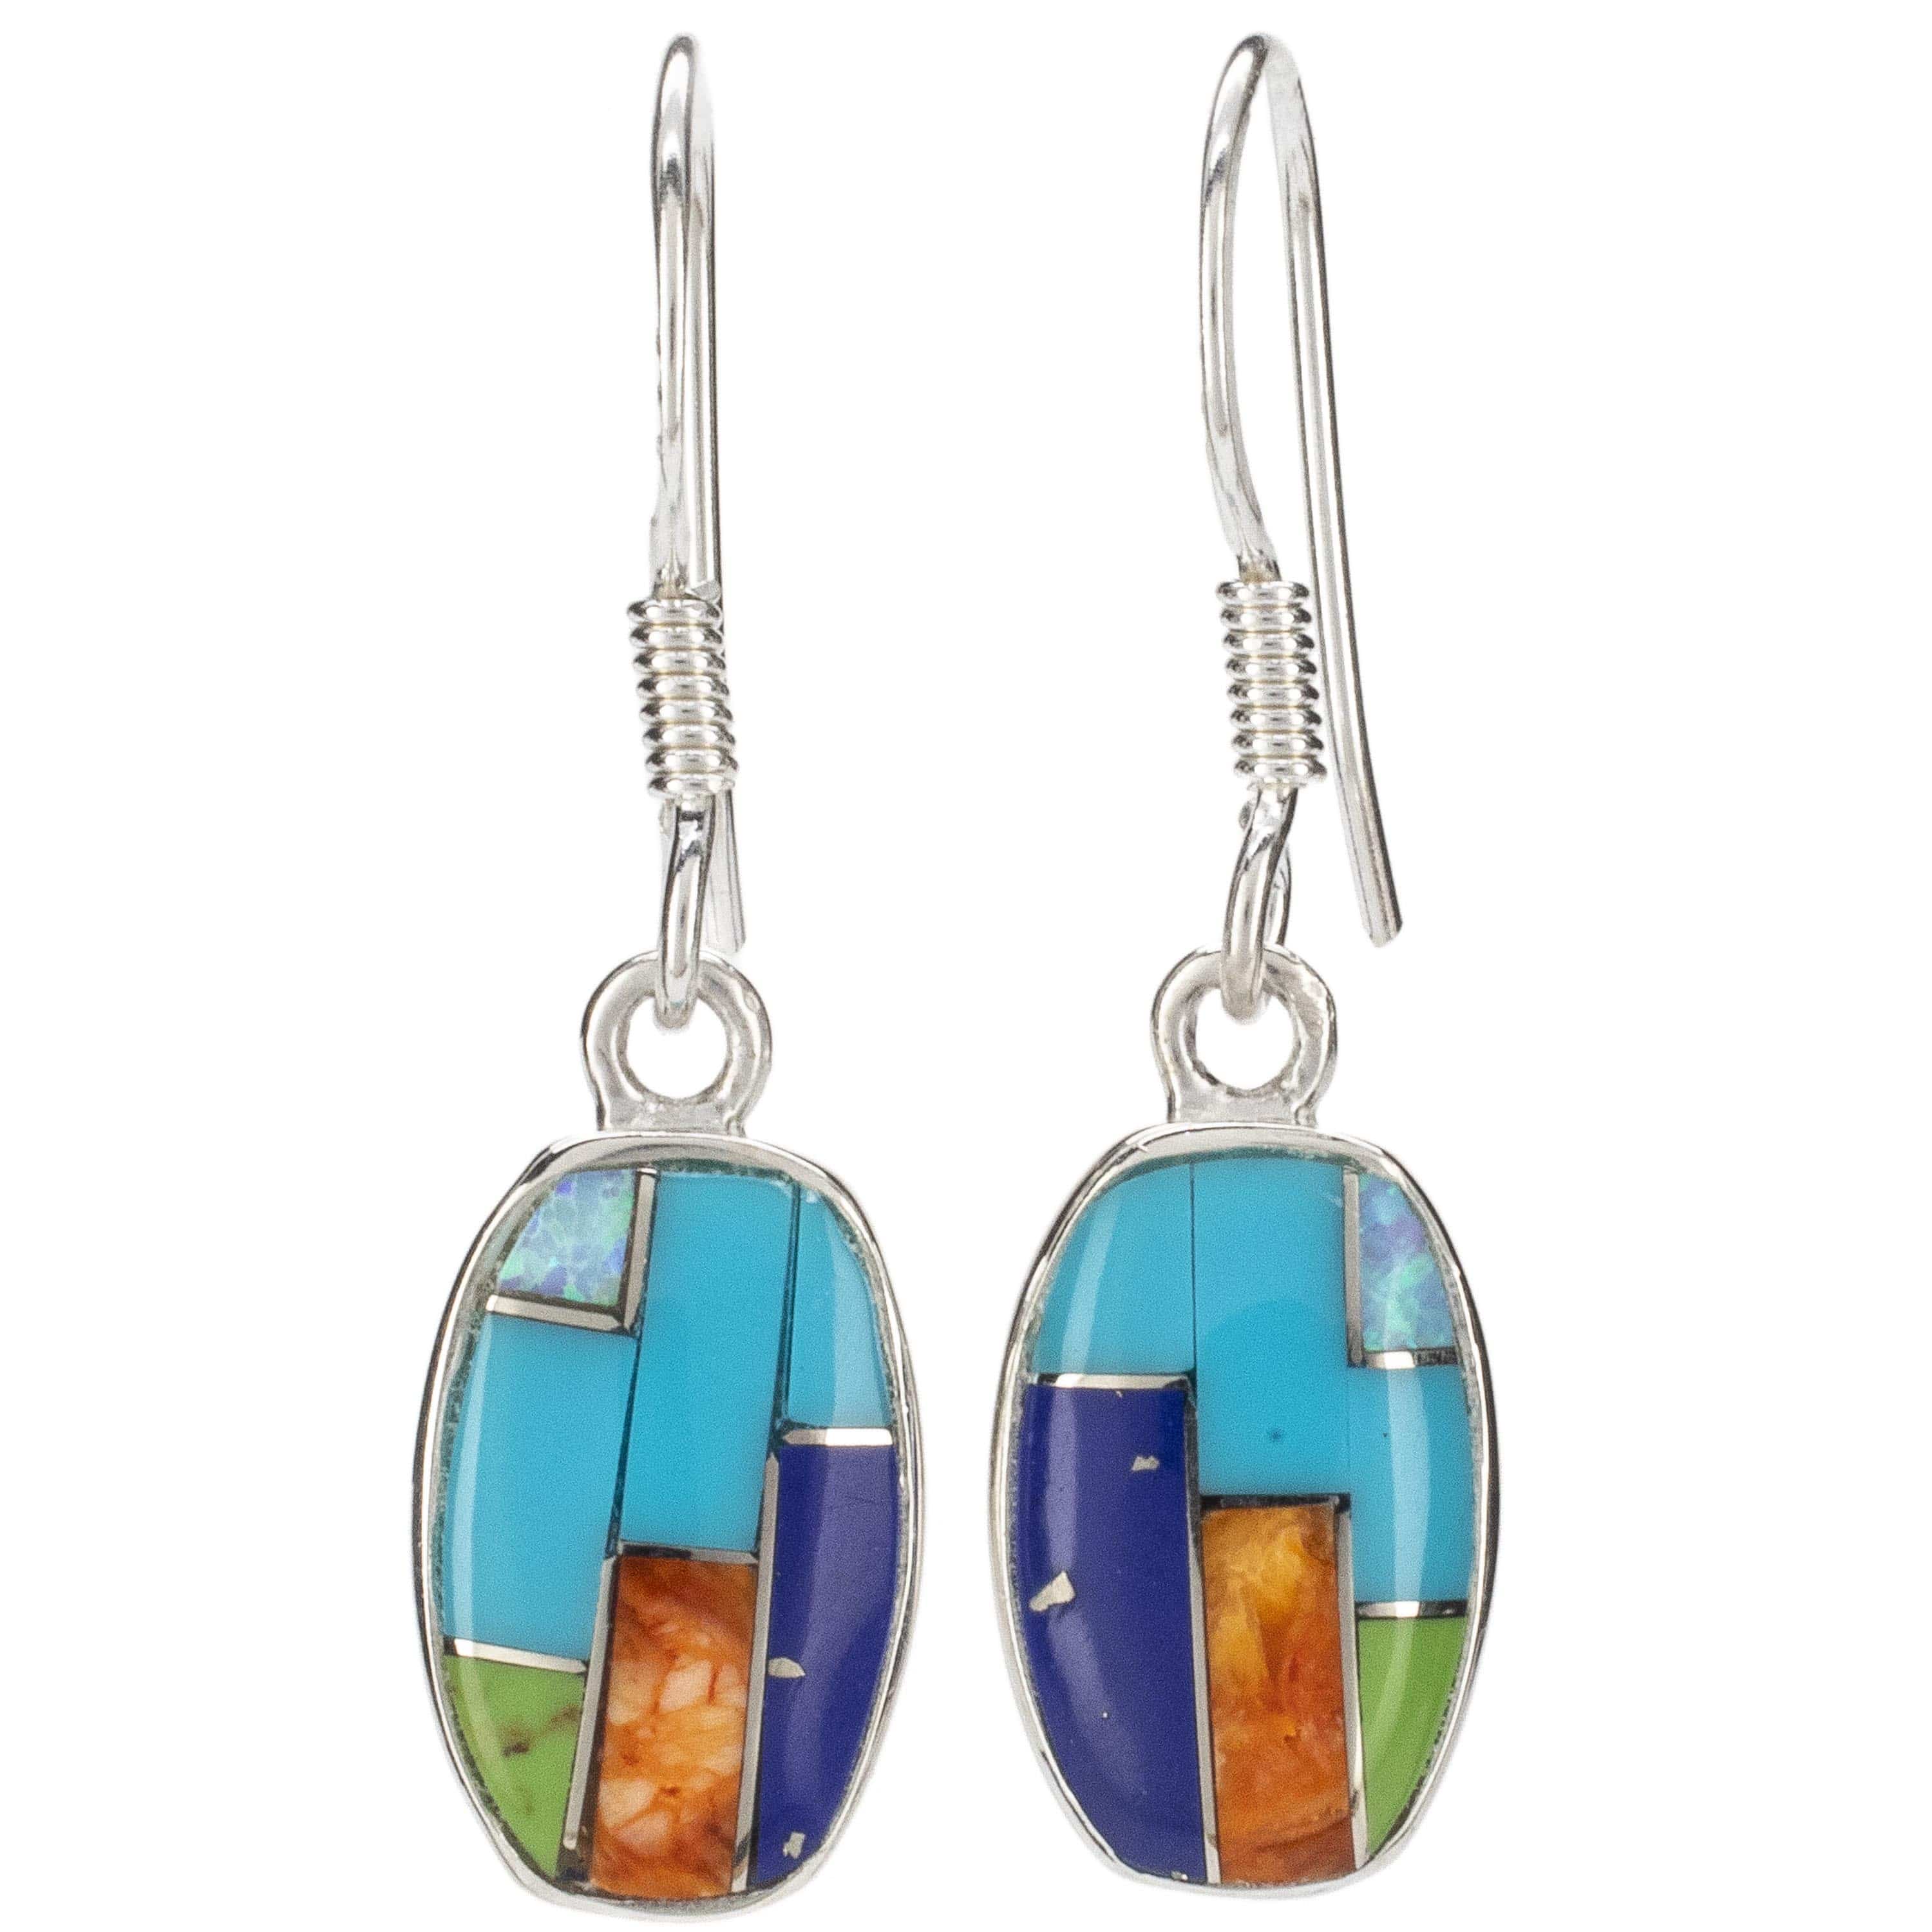 Kalifano Southwest Silver Jewelry Multi Gemstone Oval Earrings Handmade with Sterling Silver and Opal Accent NME.2073.MT